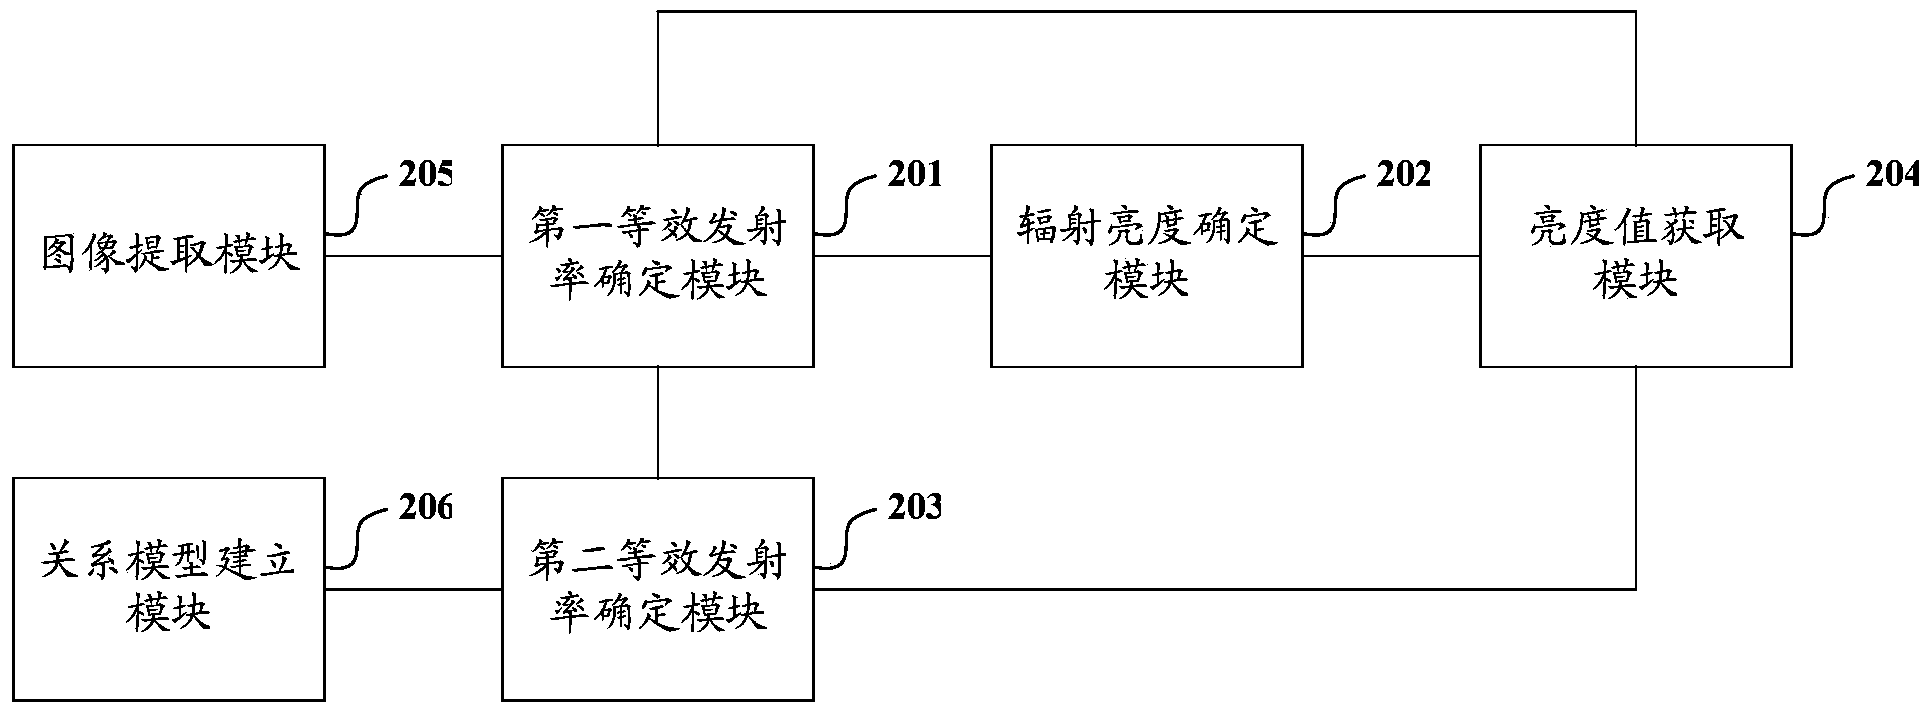 Image generating method and system based on infrared remote sensing data